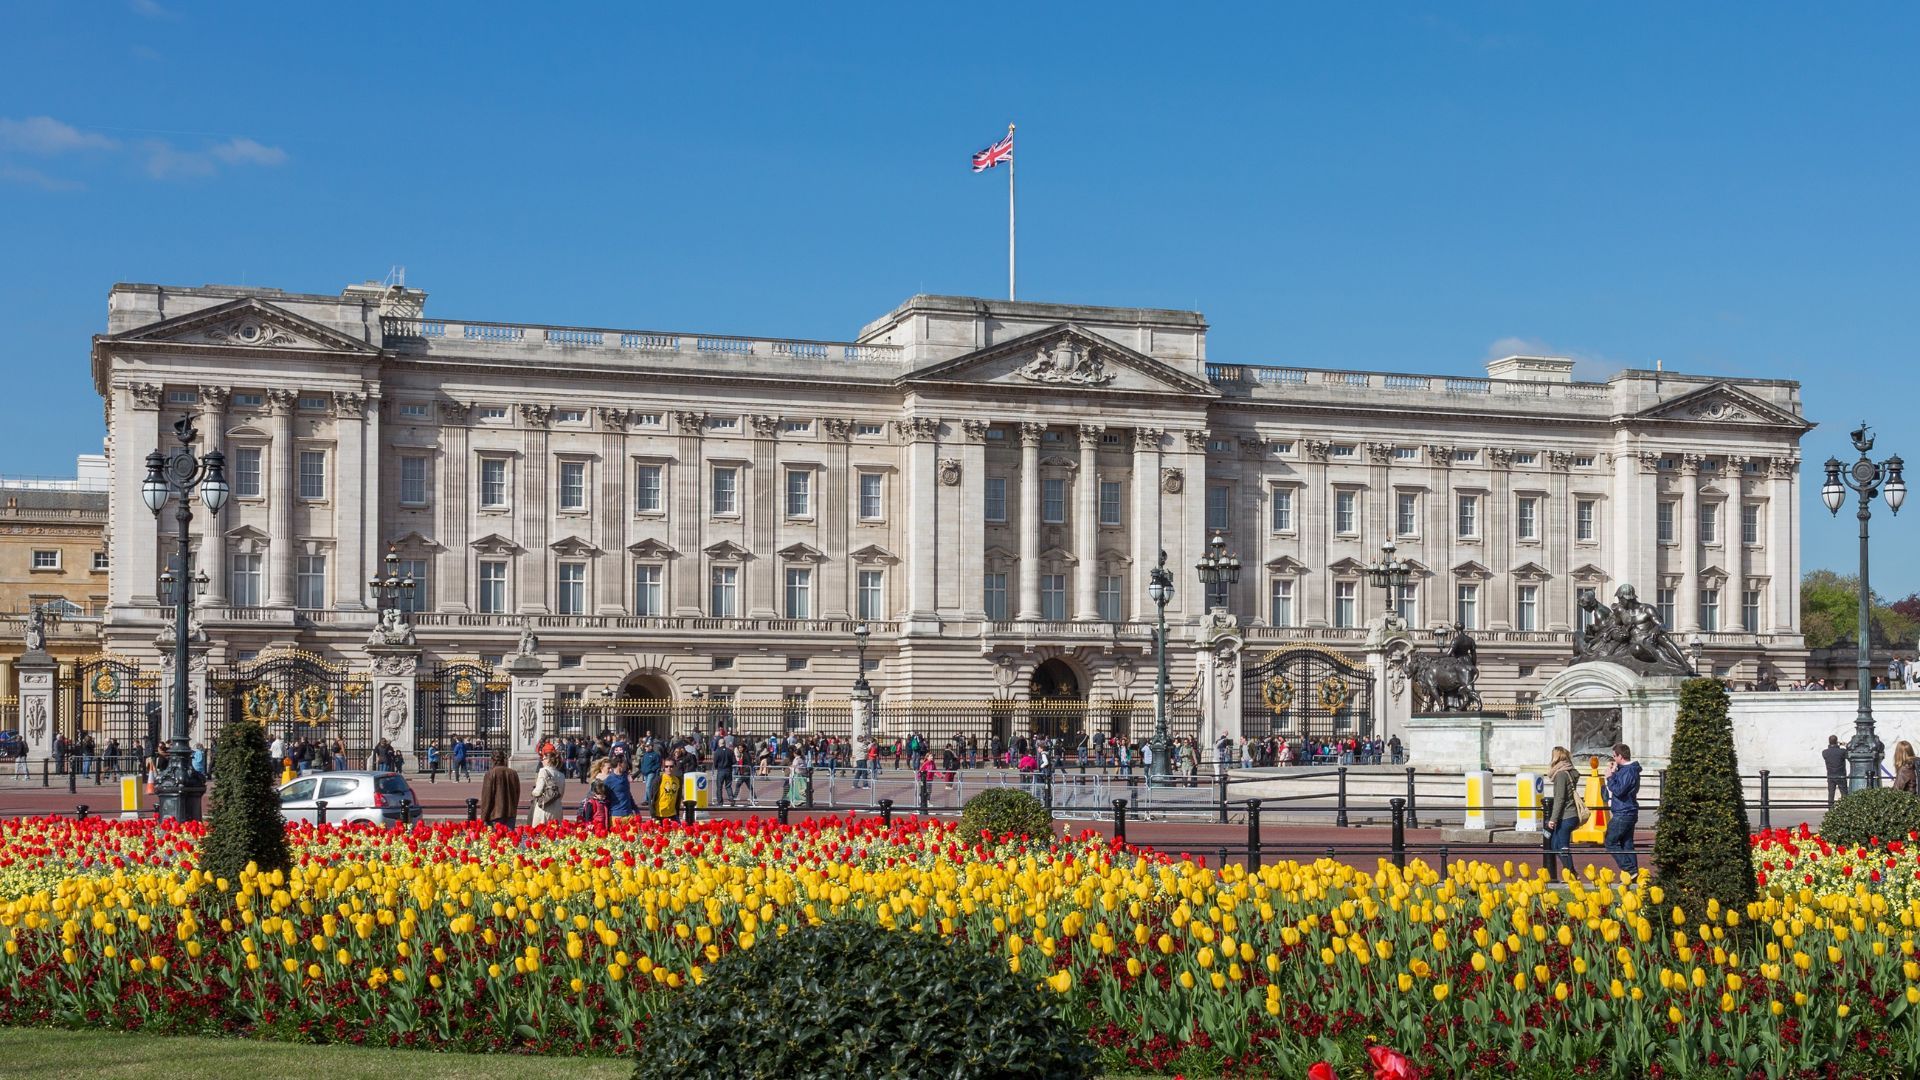 Expensive houses in the world: Buckingham Palace